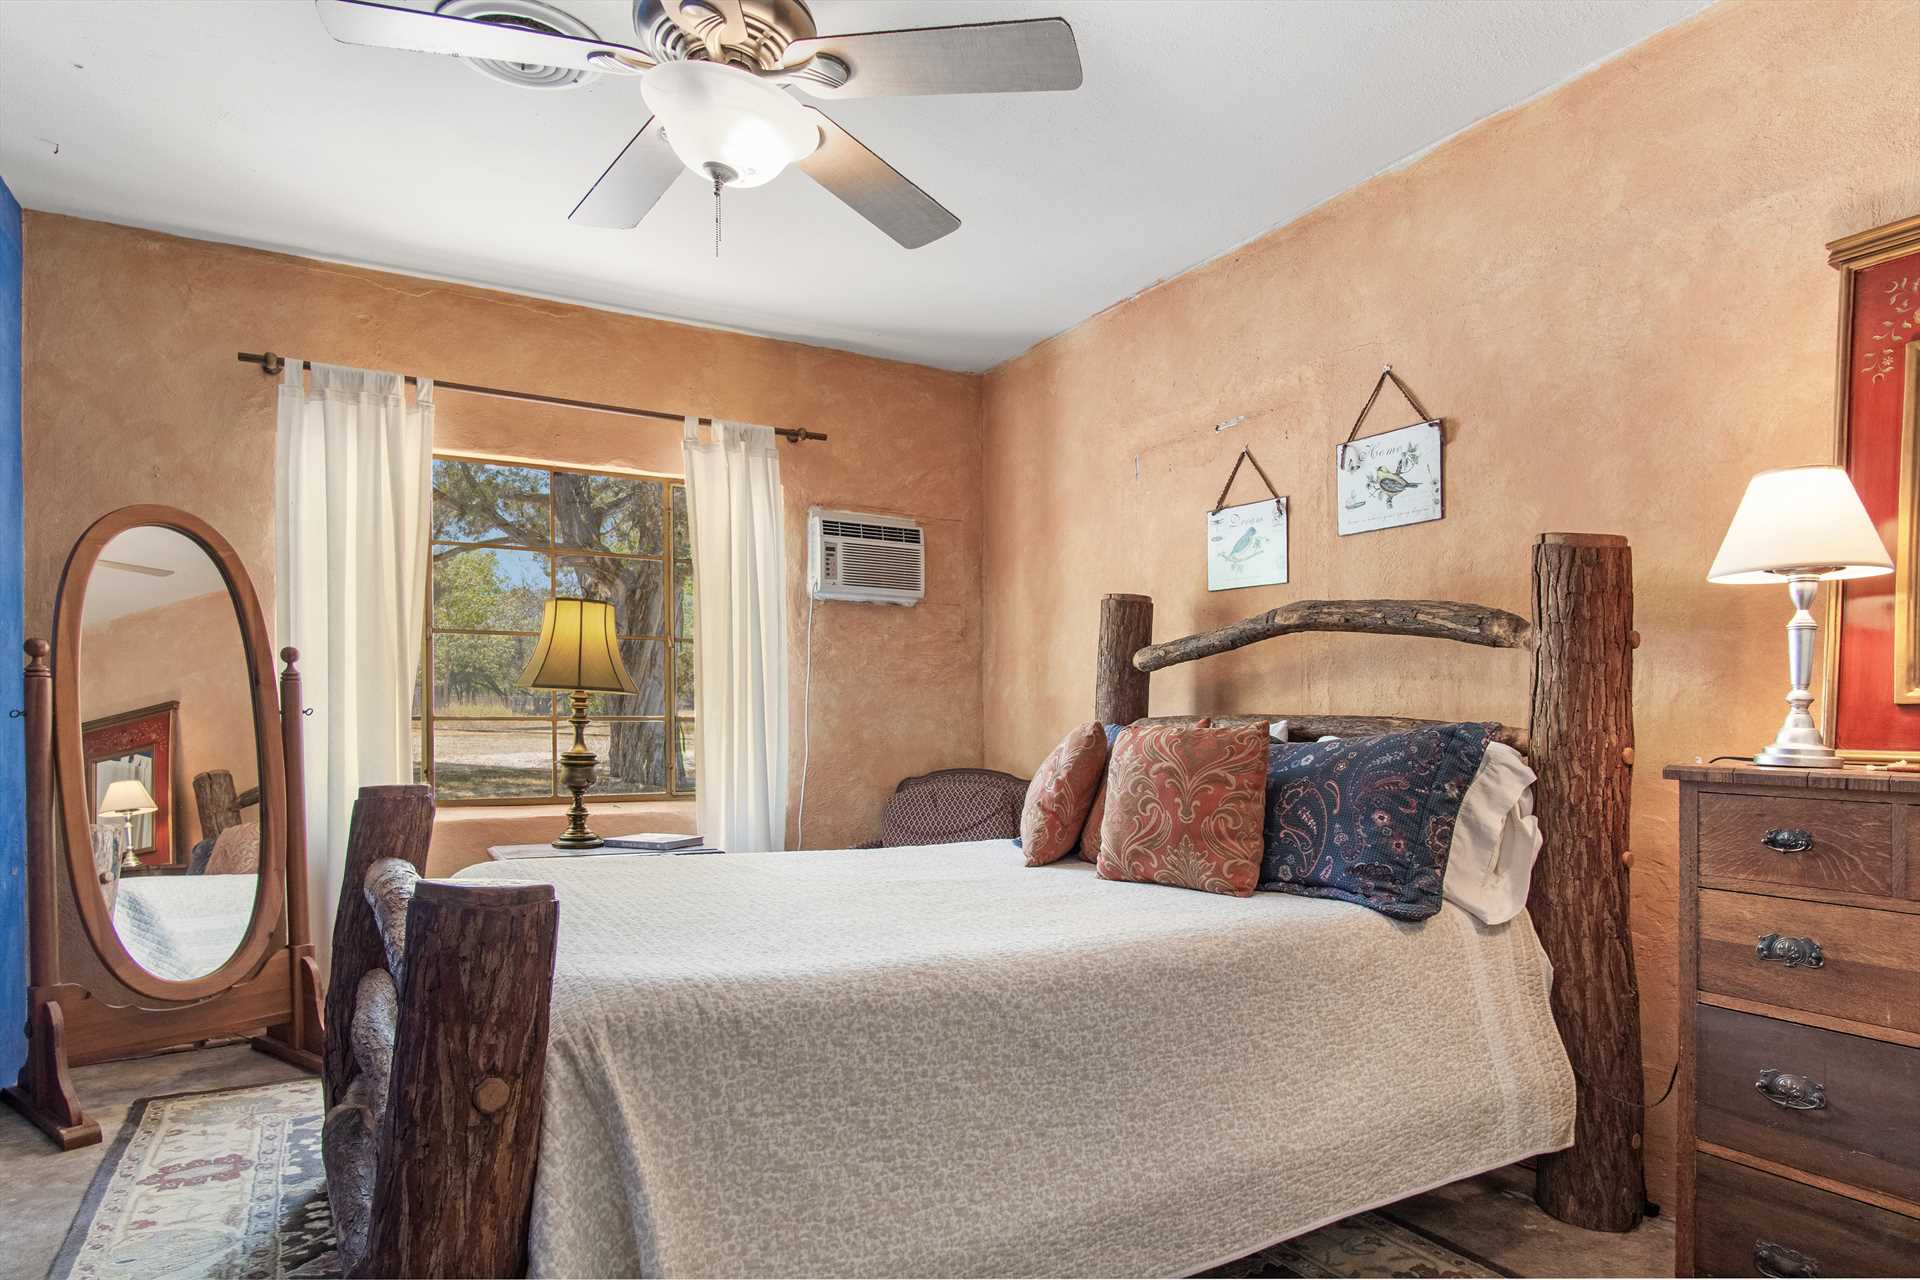                                                 As seen in this bedroom, there are individual AC units and ceiling fans throughout the house to assure individual comfort!